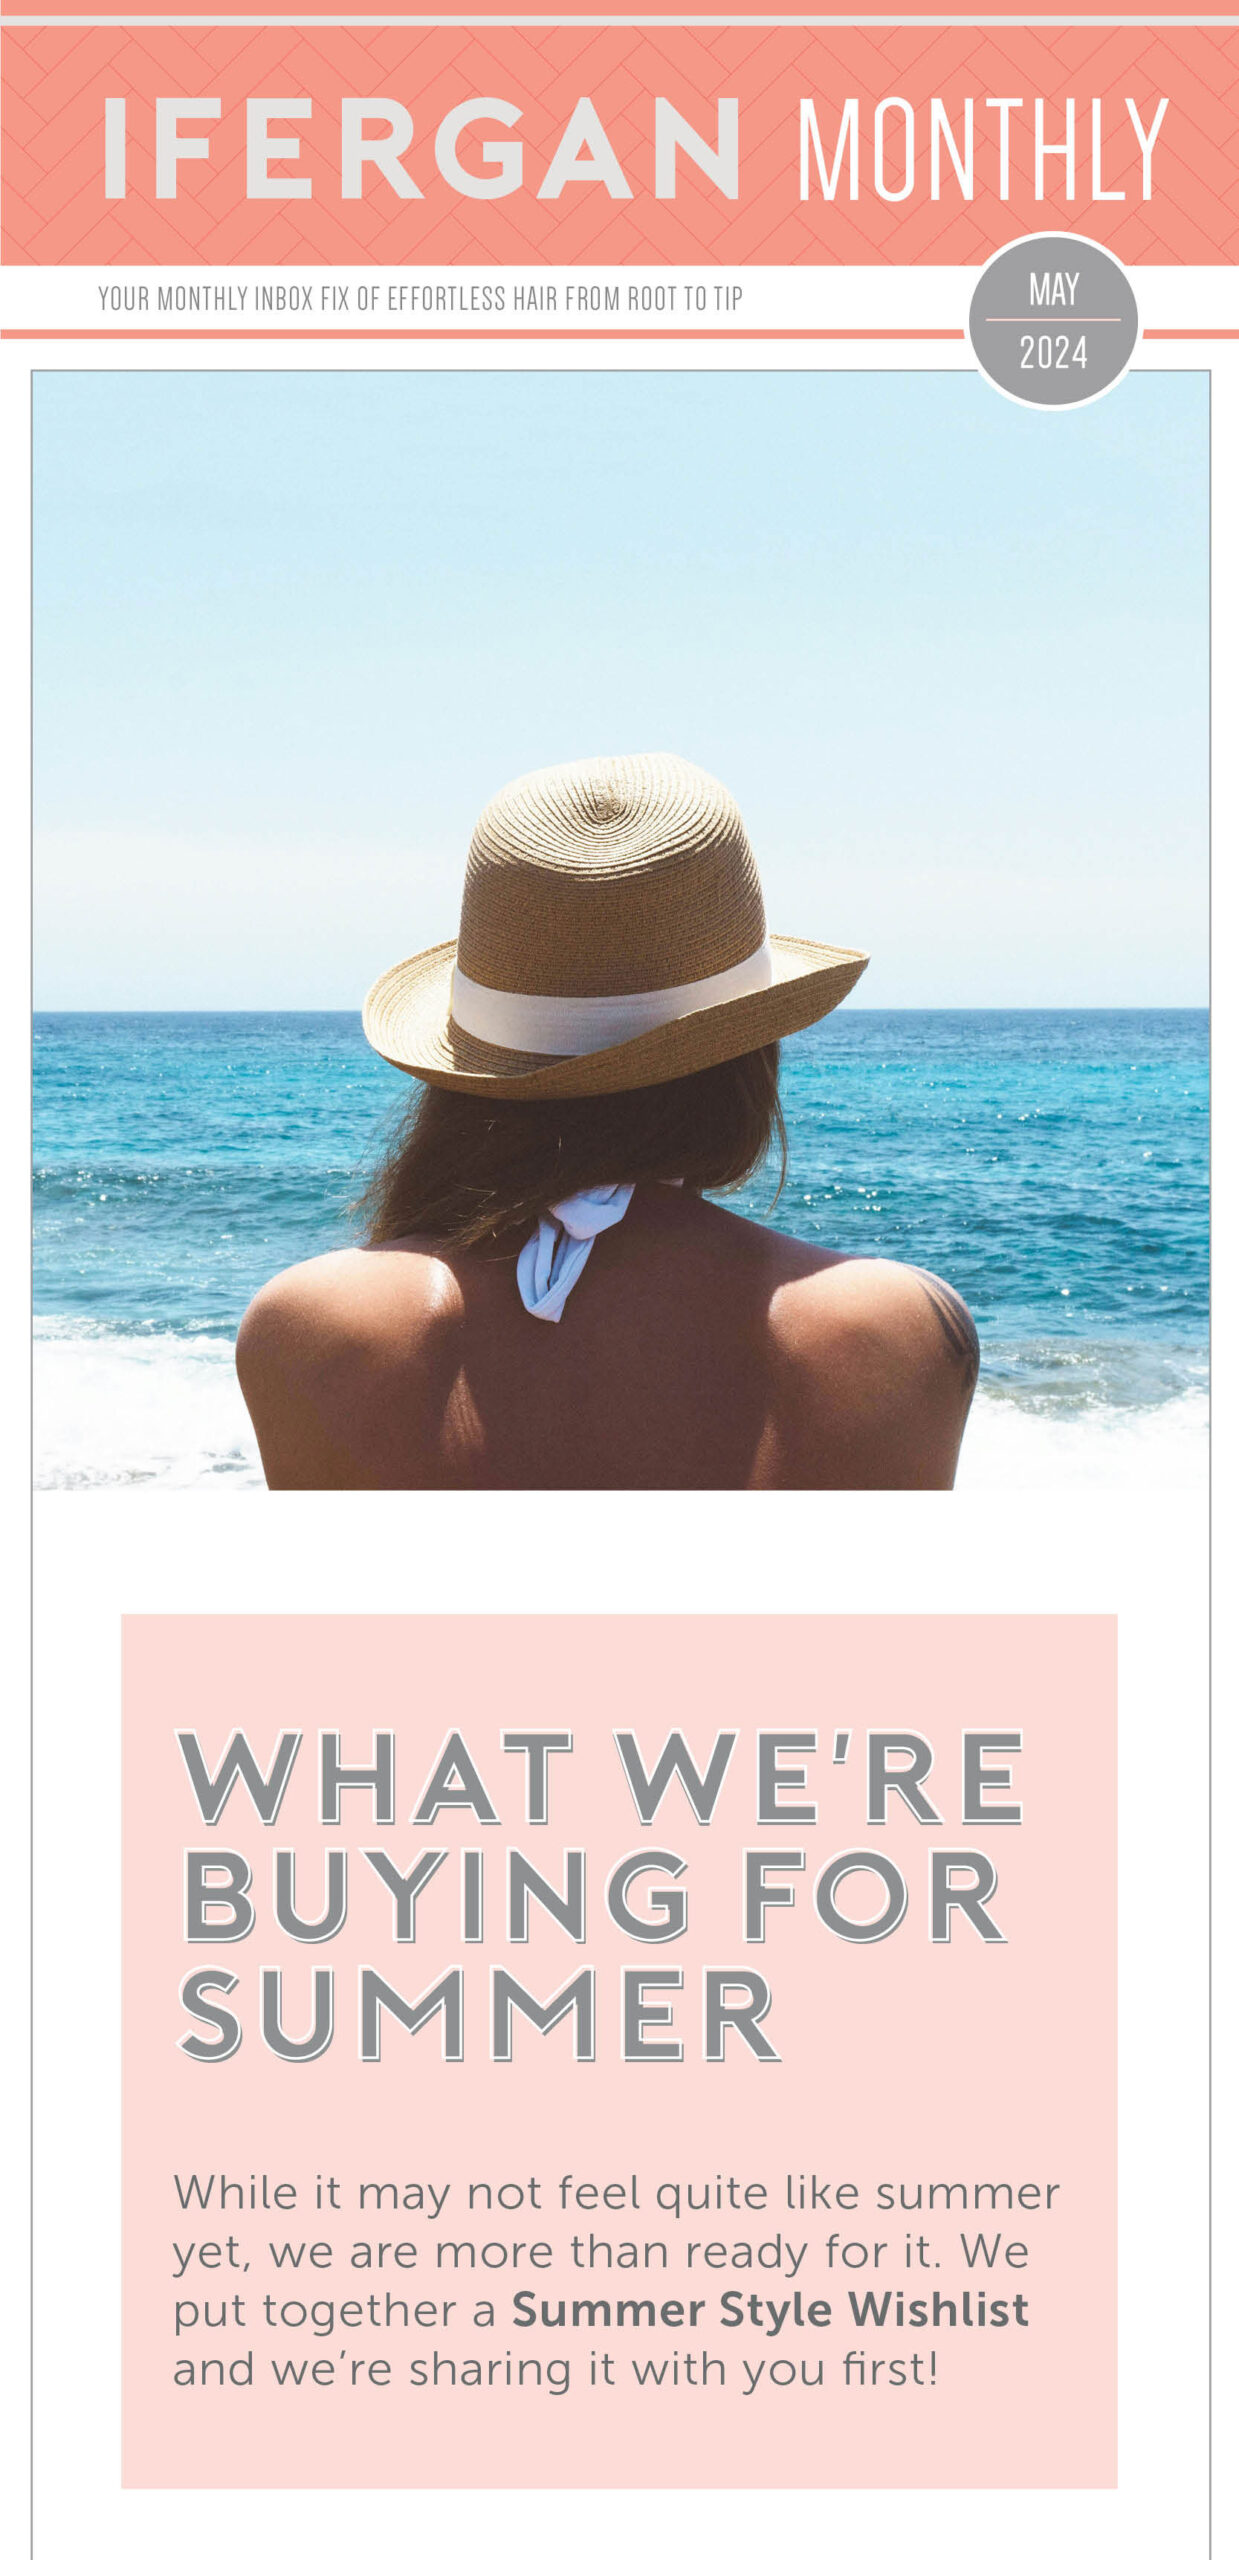 What We’re Buying for Summer While it may not feel quite like summer yet- we are more than ready for it. We put together a summer style Wishlist and we’re sharing it with you first!